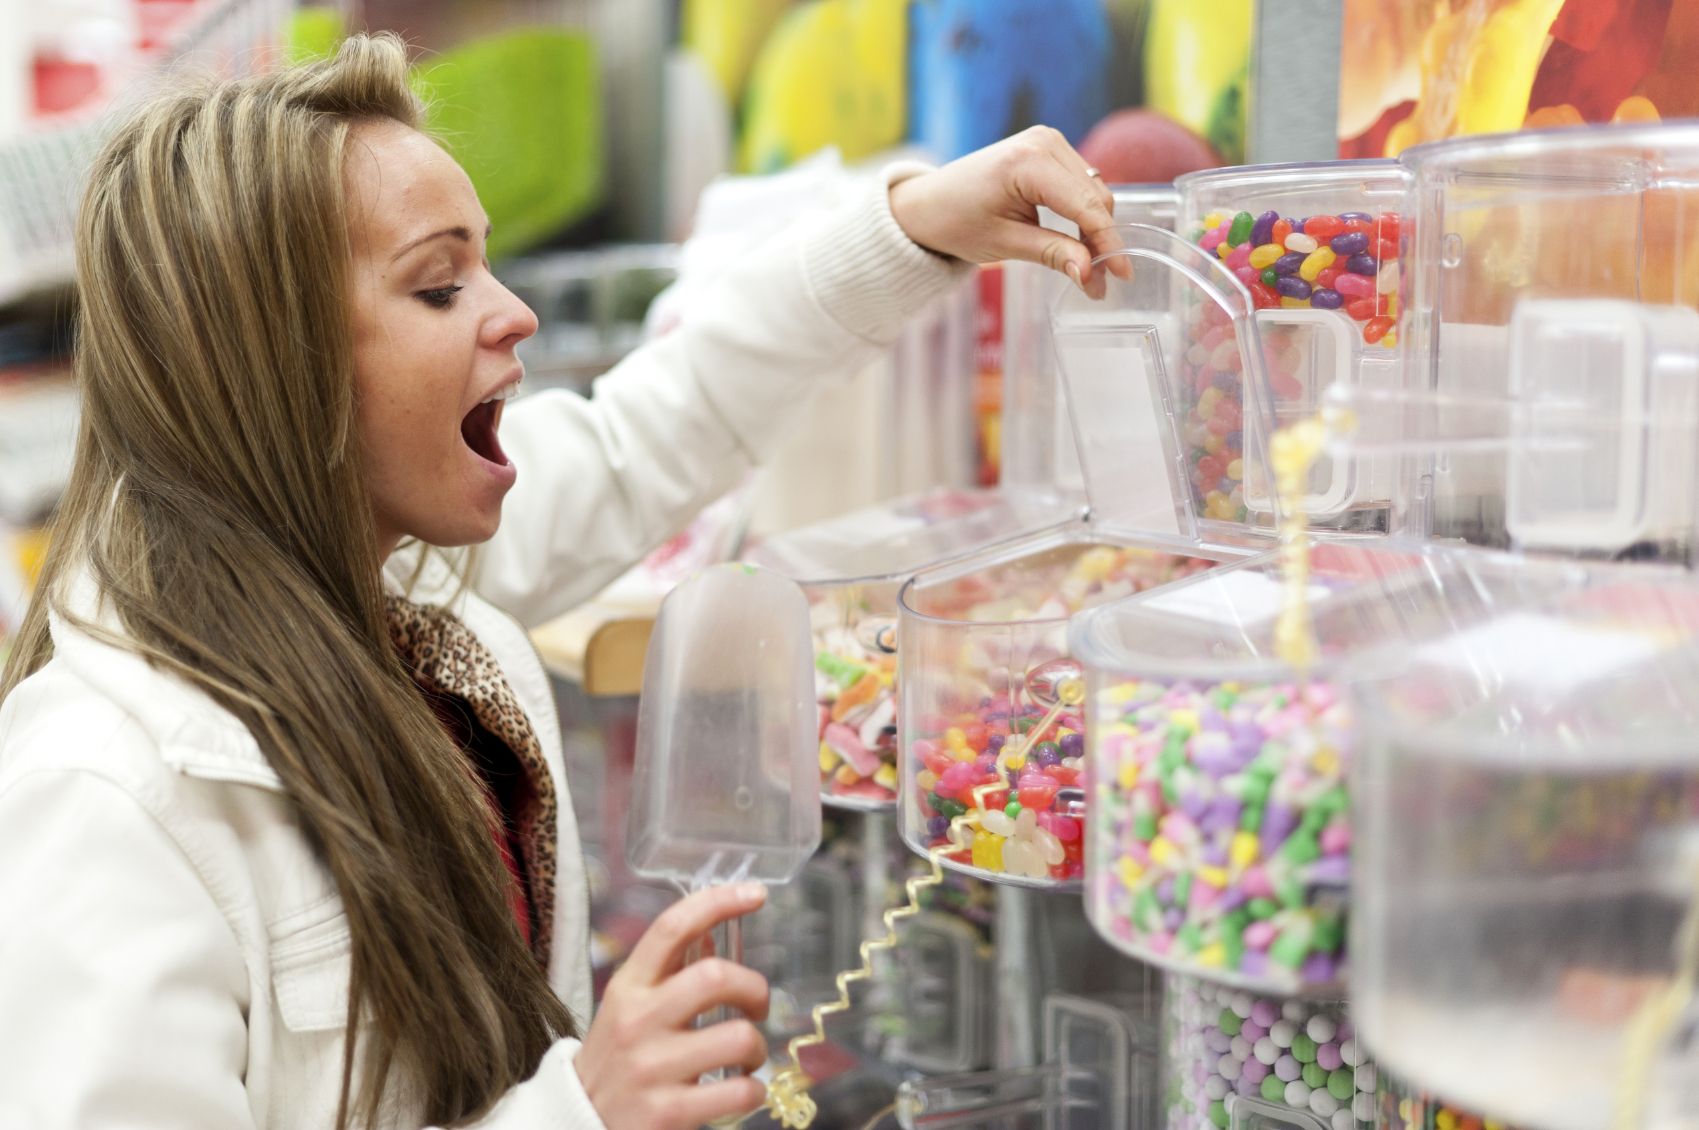 Prospects of the City: Exactly like kids in a candy store